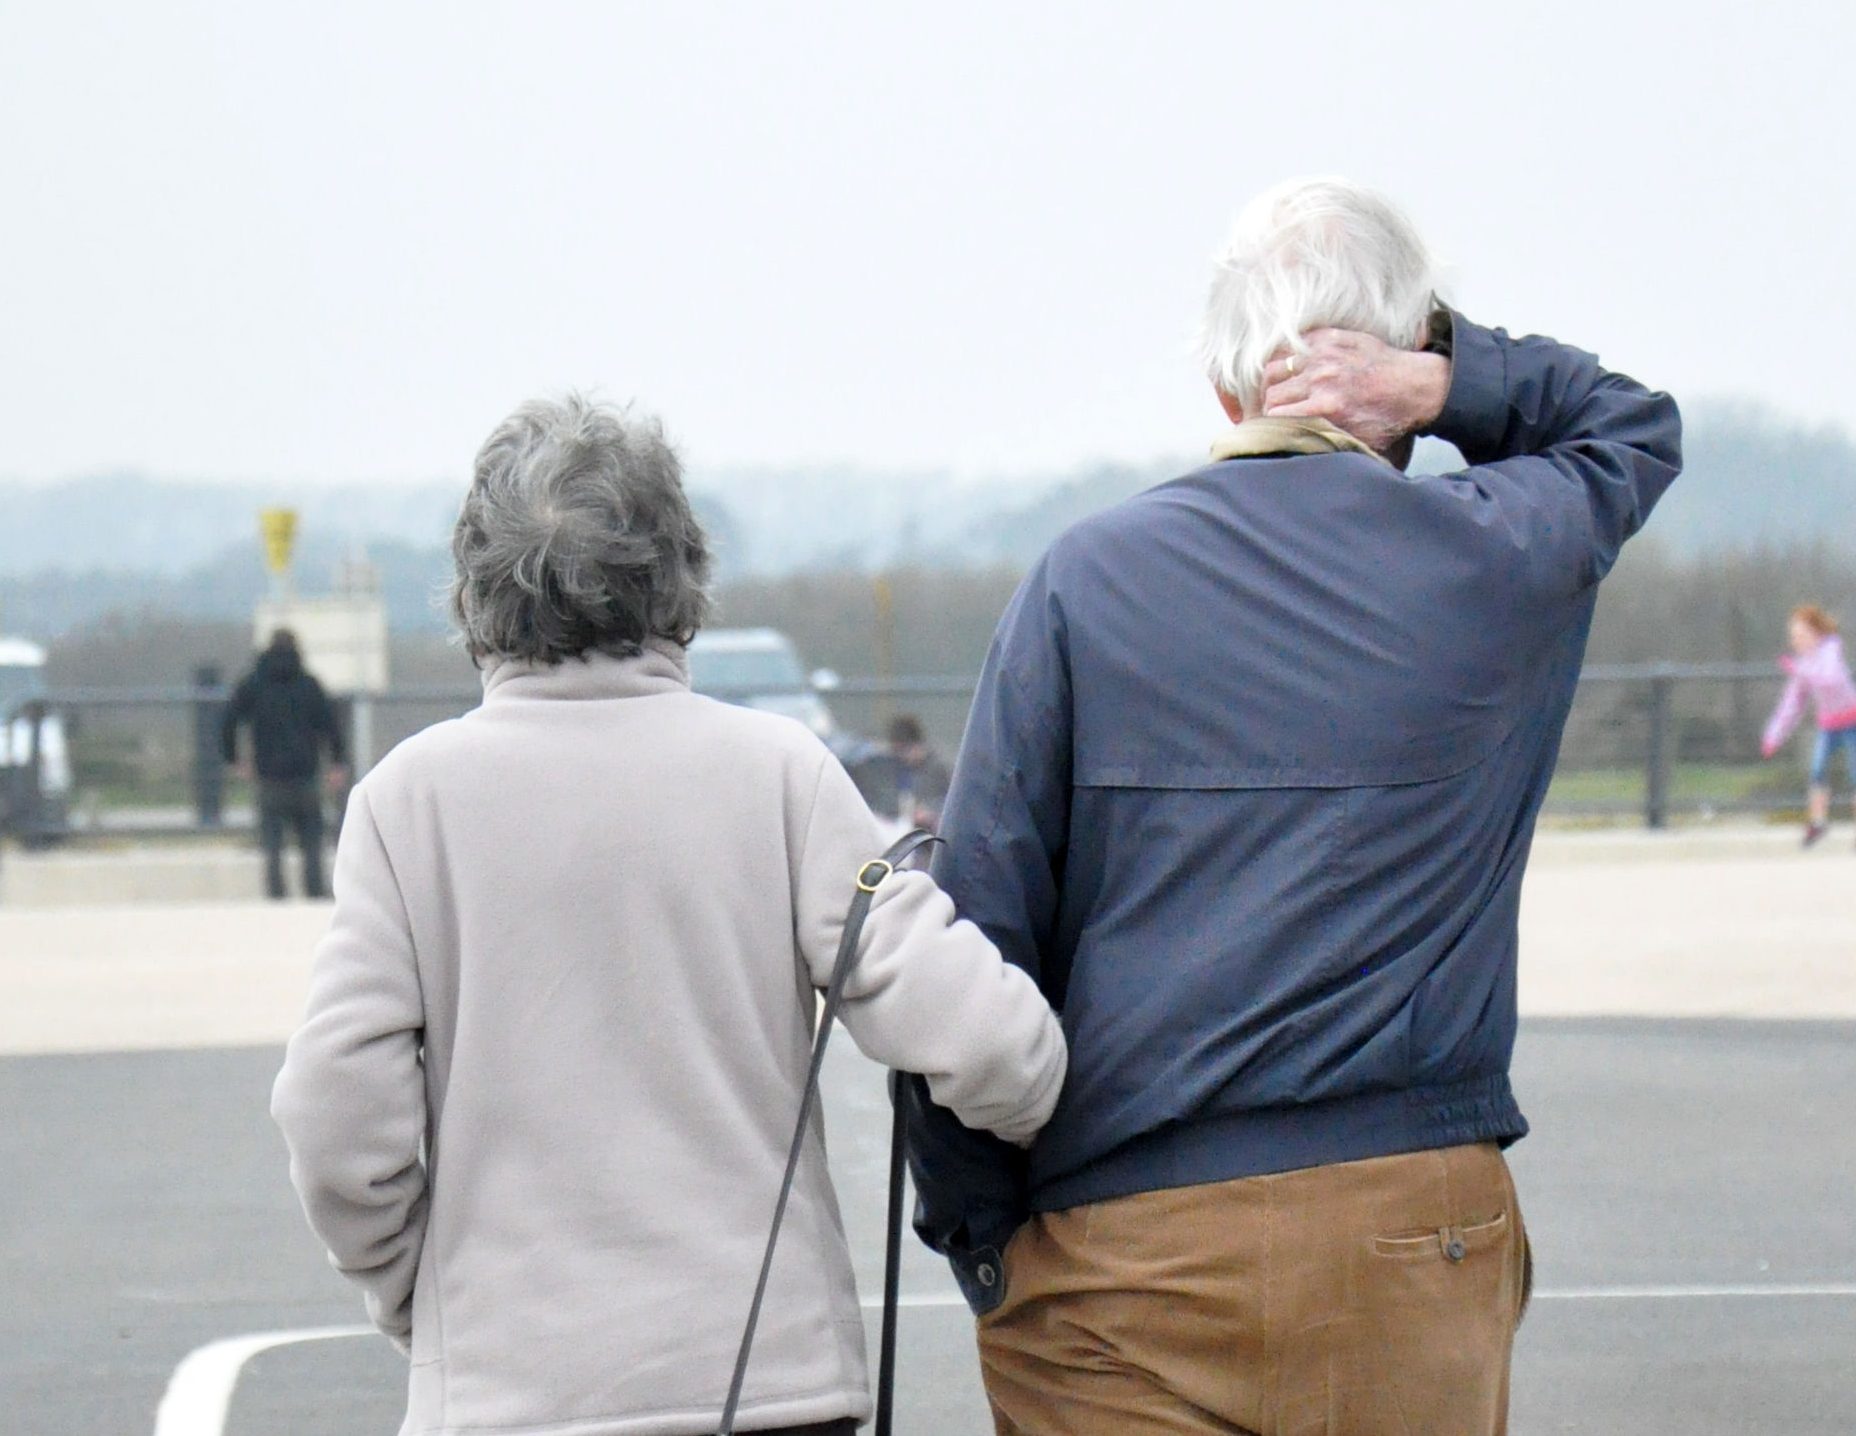 A "dramatic" increase in the number of older cohabiting couples could lead to more people missing out on valuable tax breaks and state pension rights, analysis by an insurer suggests (Kirsty O'Connor/PA Wire)